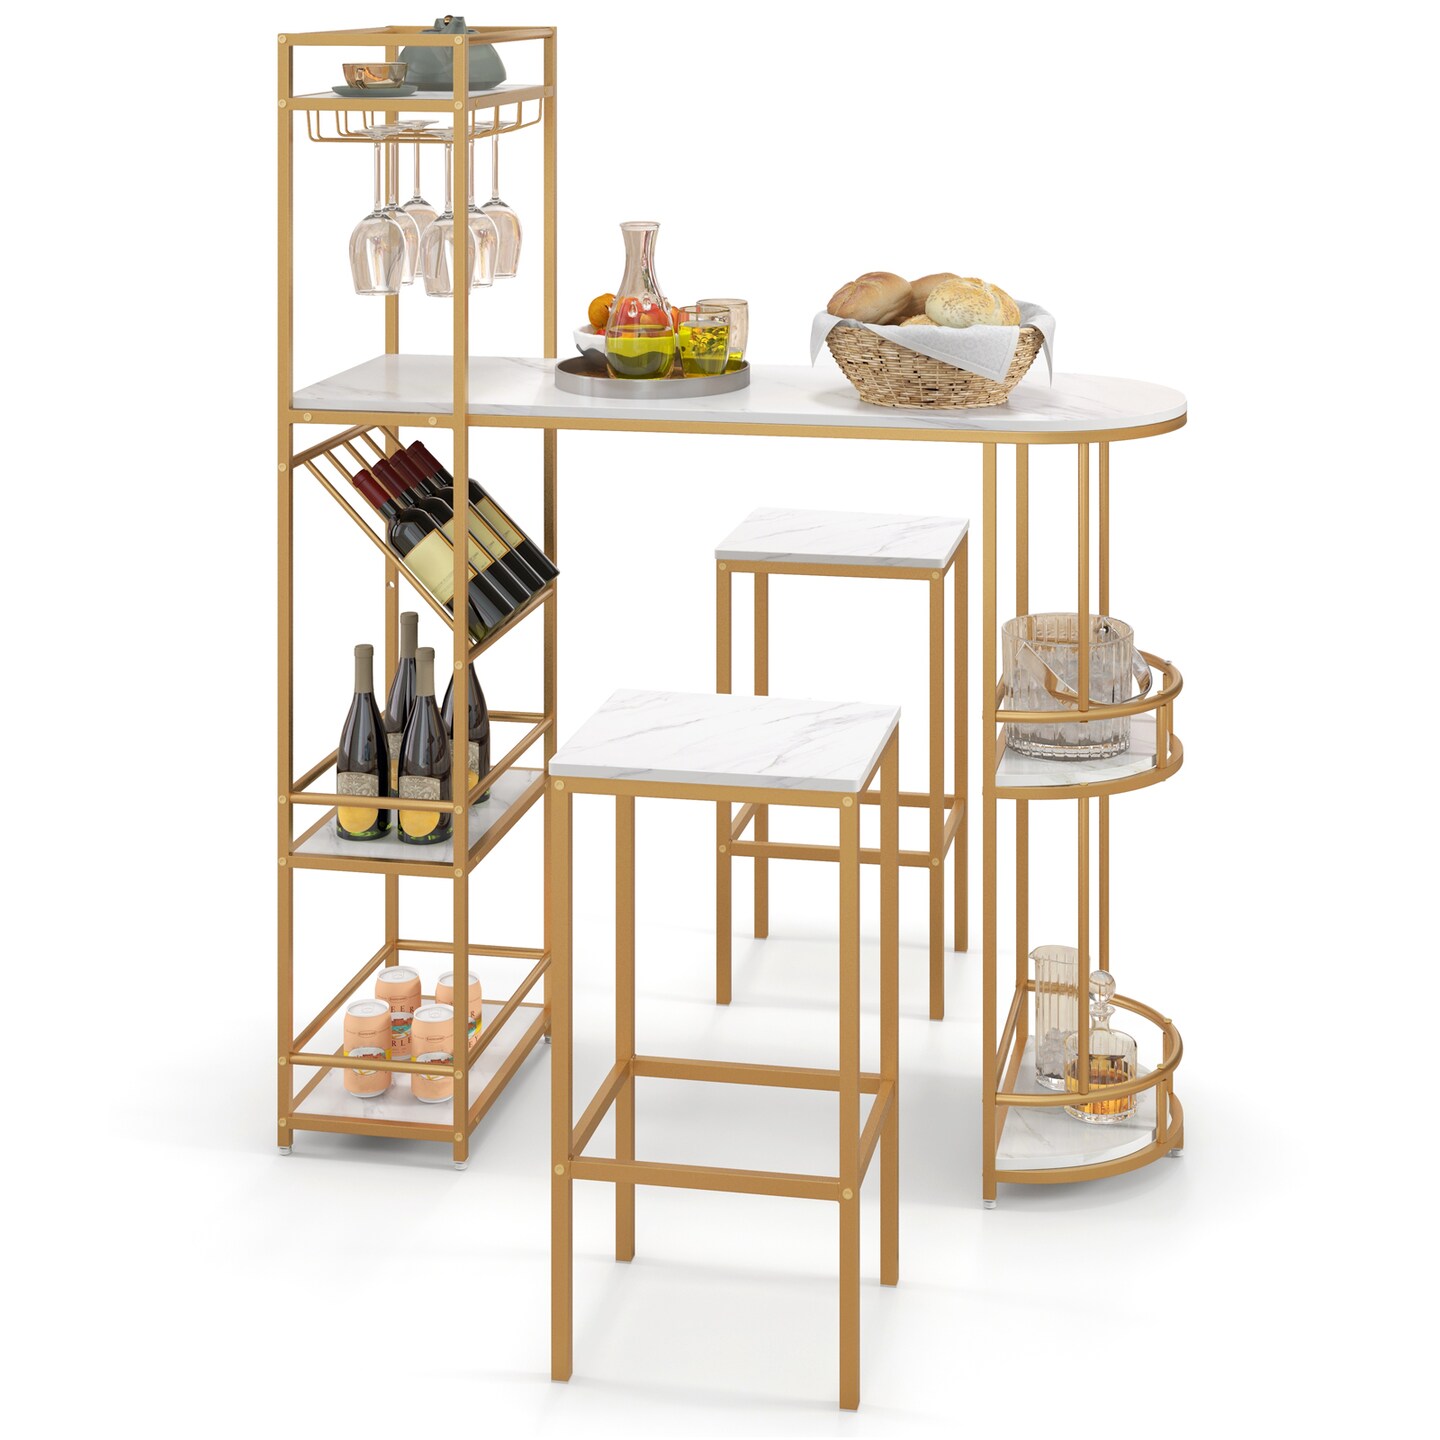 3 Pieces Bar Table Set With Storage Shelves And Wine Rack-golden